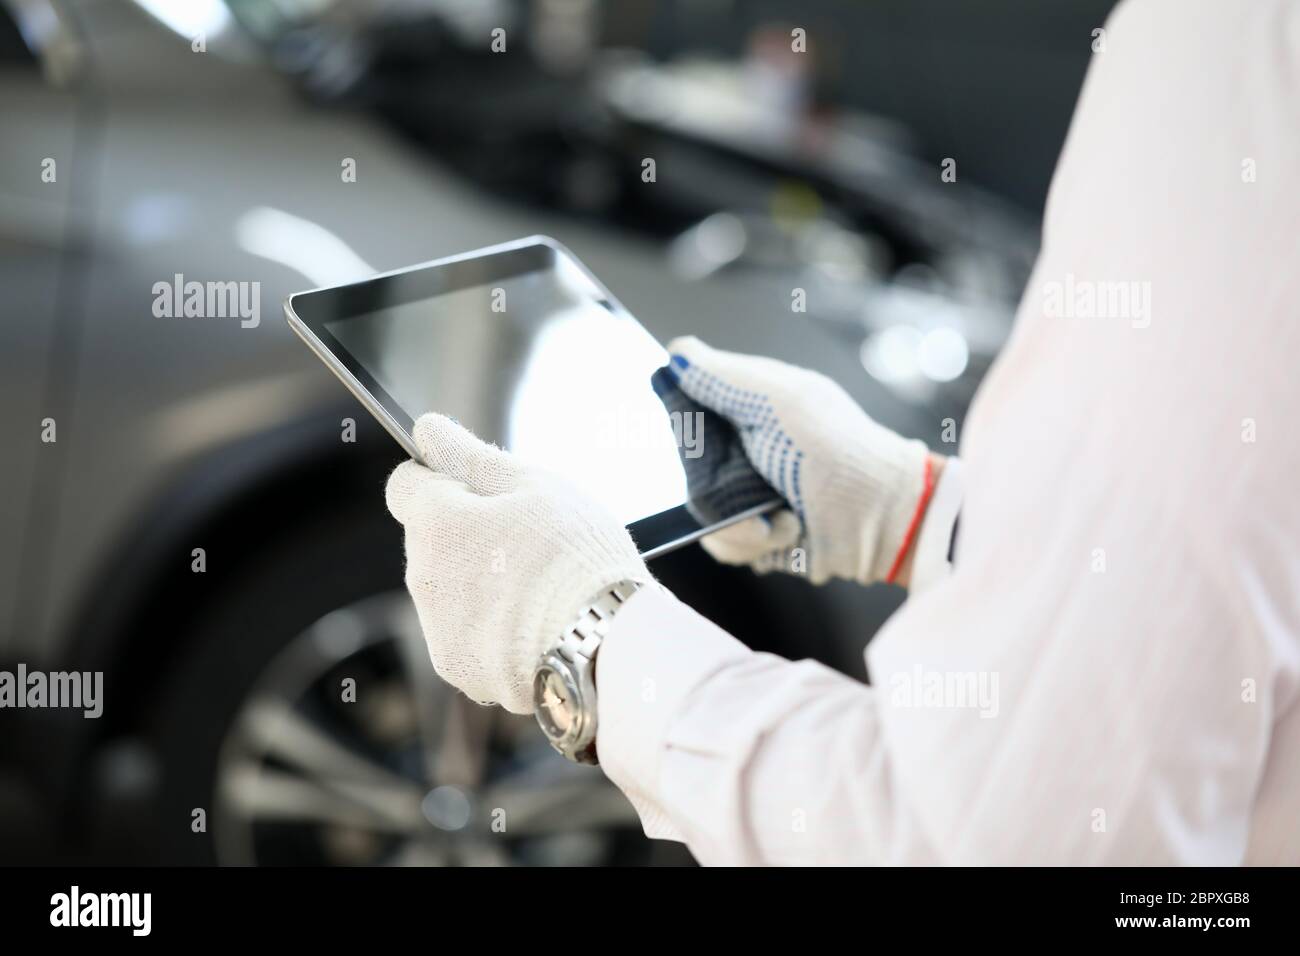 Man holds tablet near car for troubleshooting Stock Photo